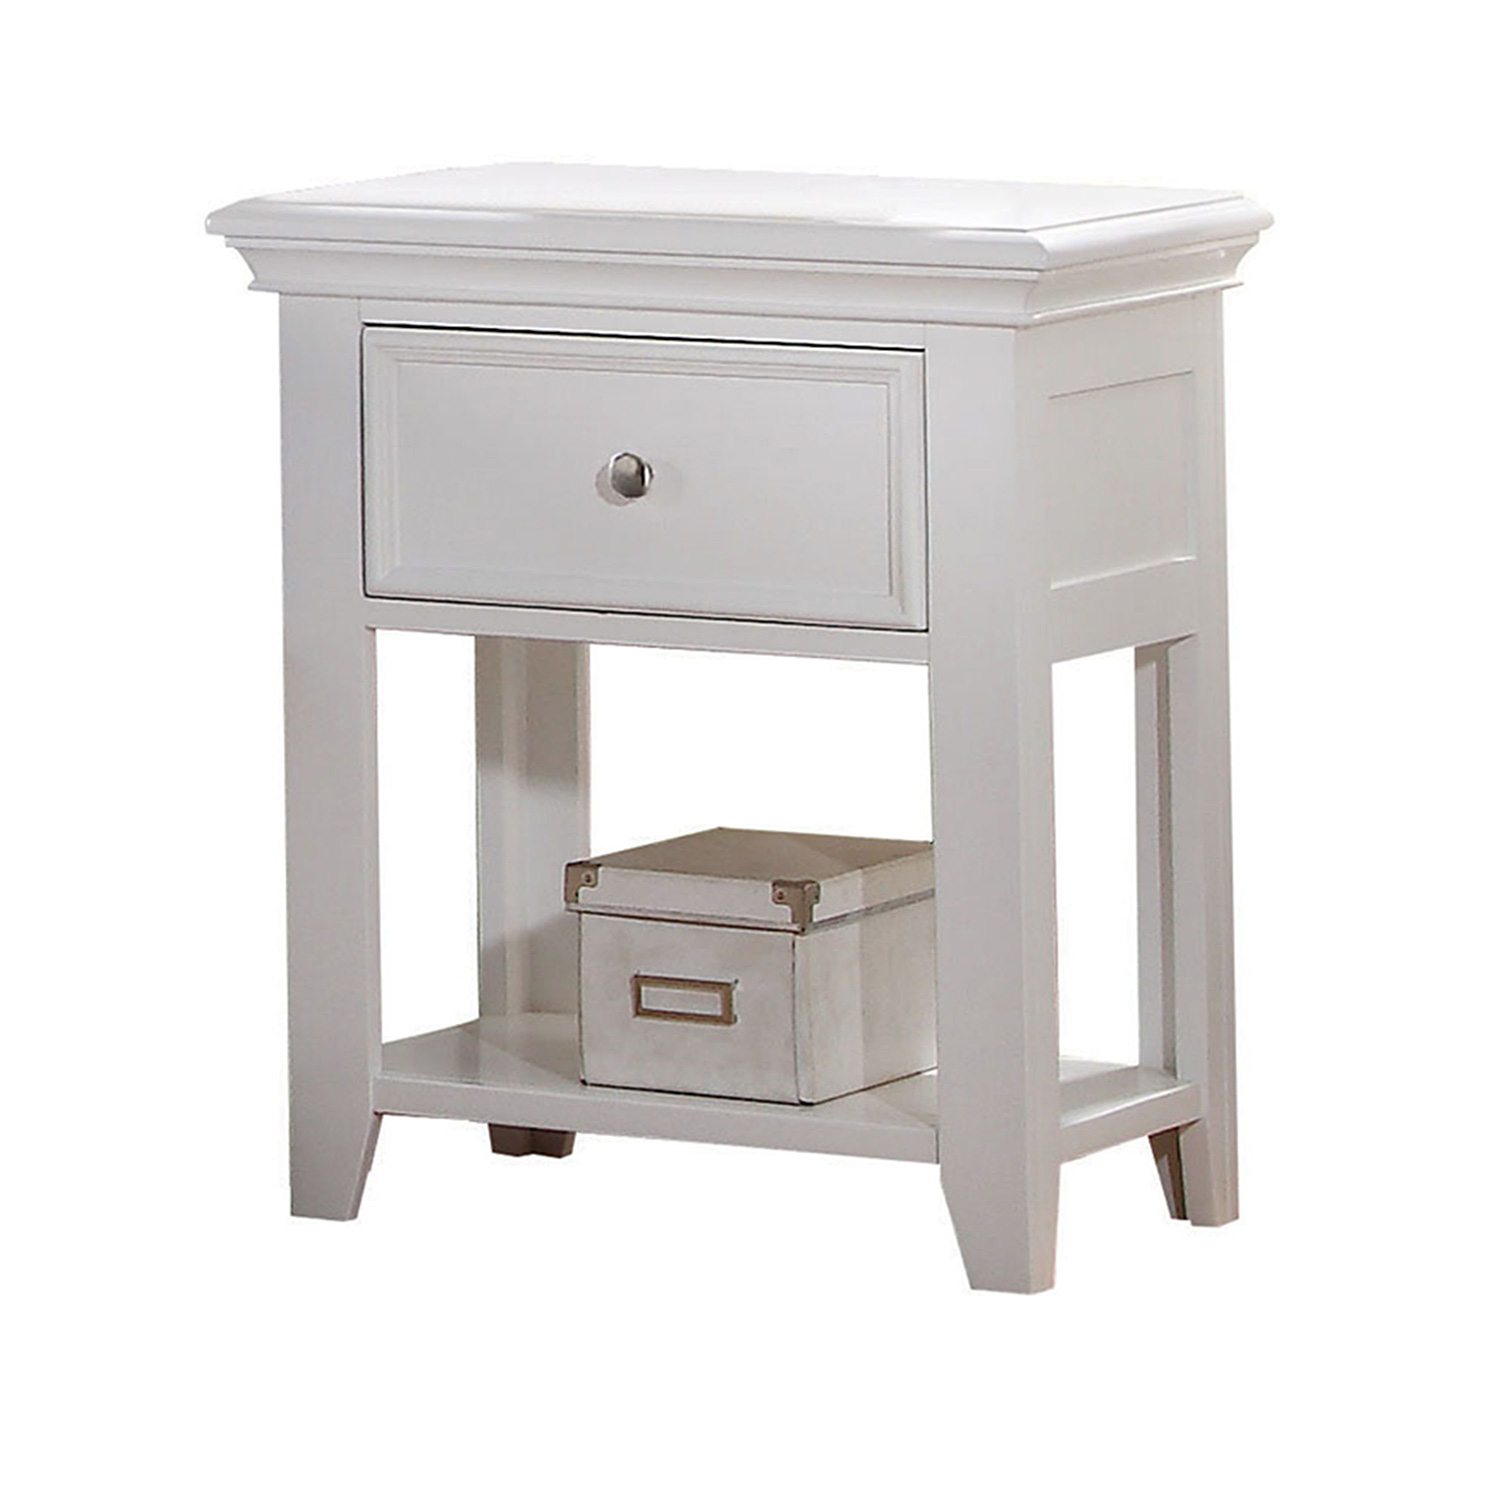 Acme Lacey Nightstand with Drawer - White